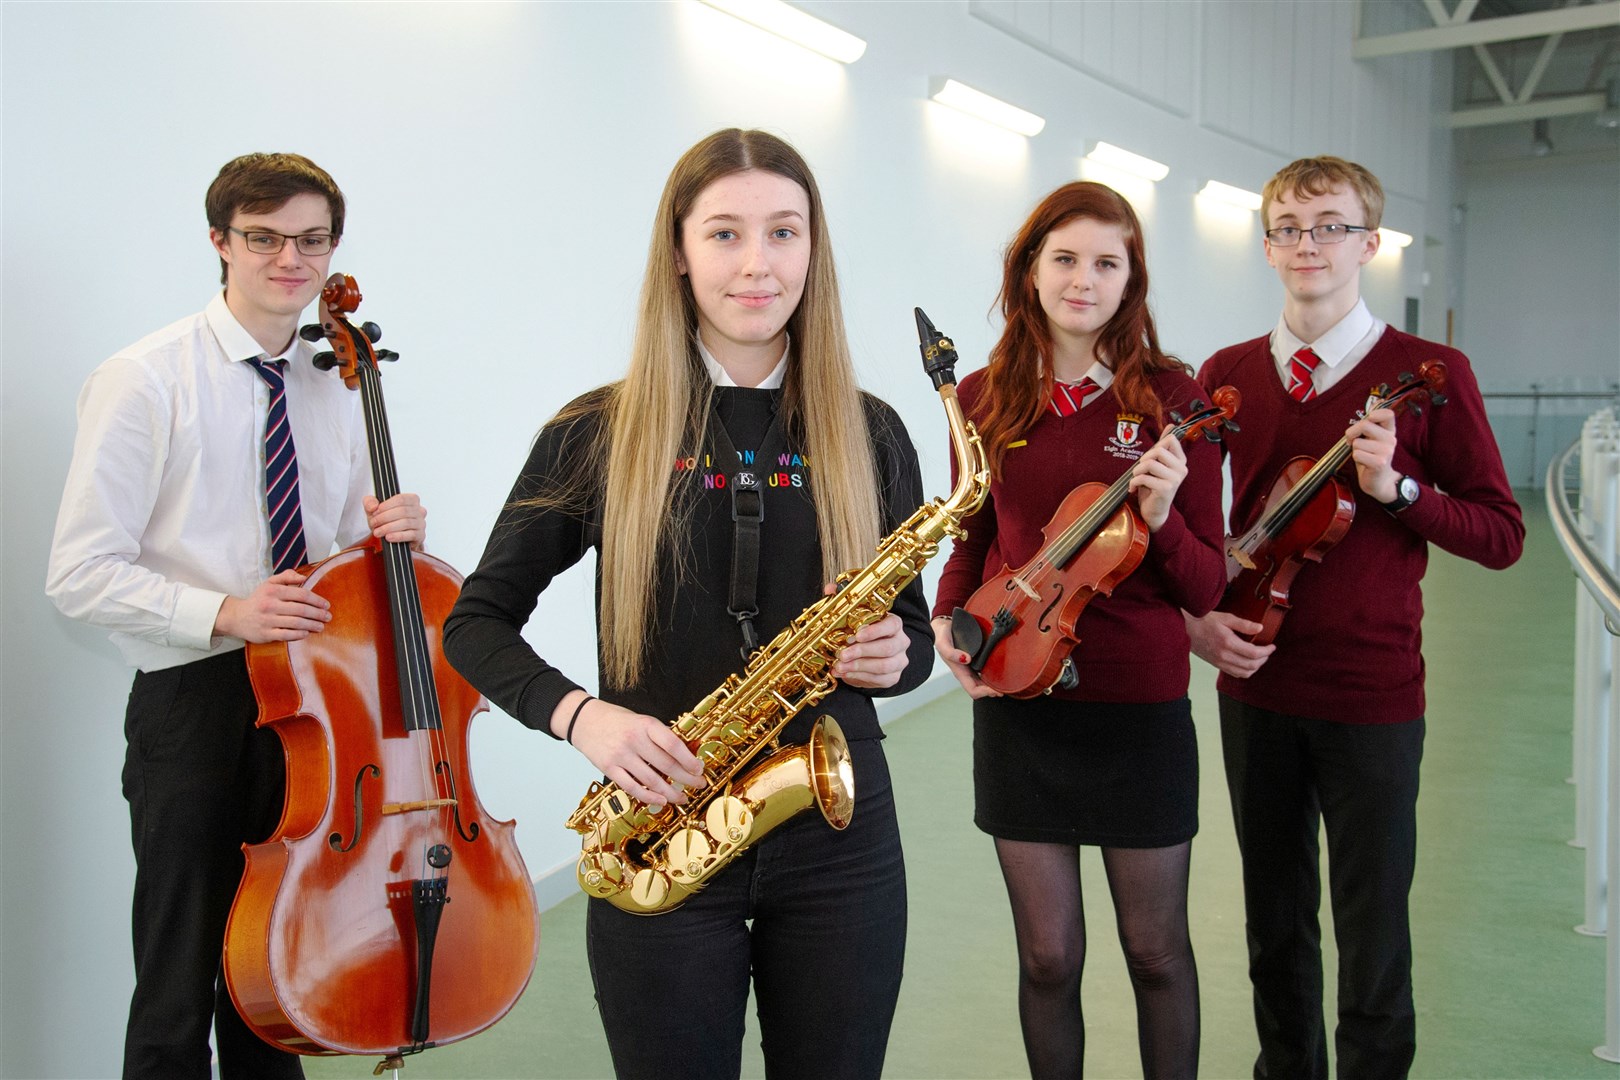 Ready to play at the concert are (from left) James Orr, Abby Carmichael, Jessica Allan and Cameron Howie.